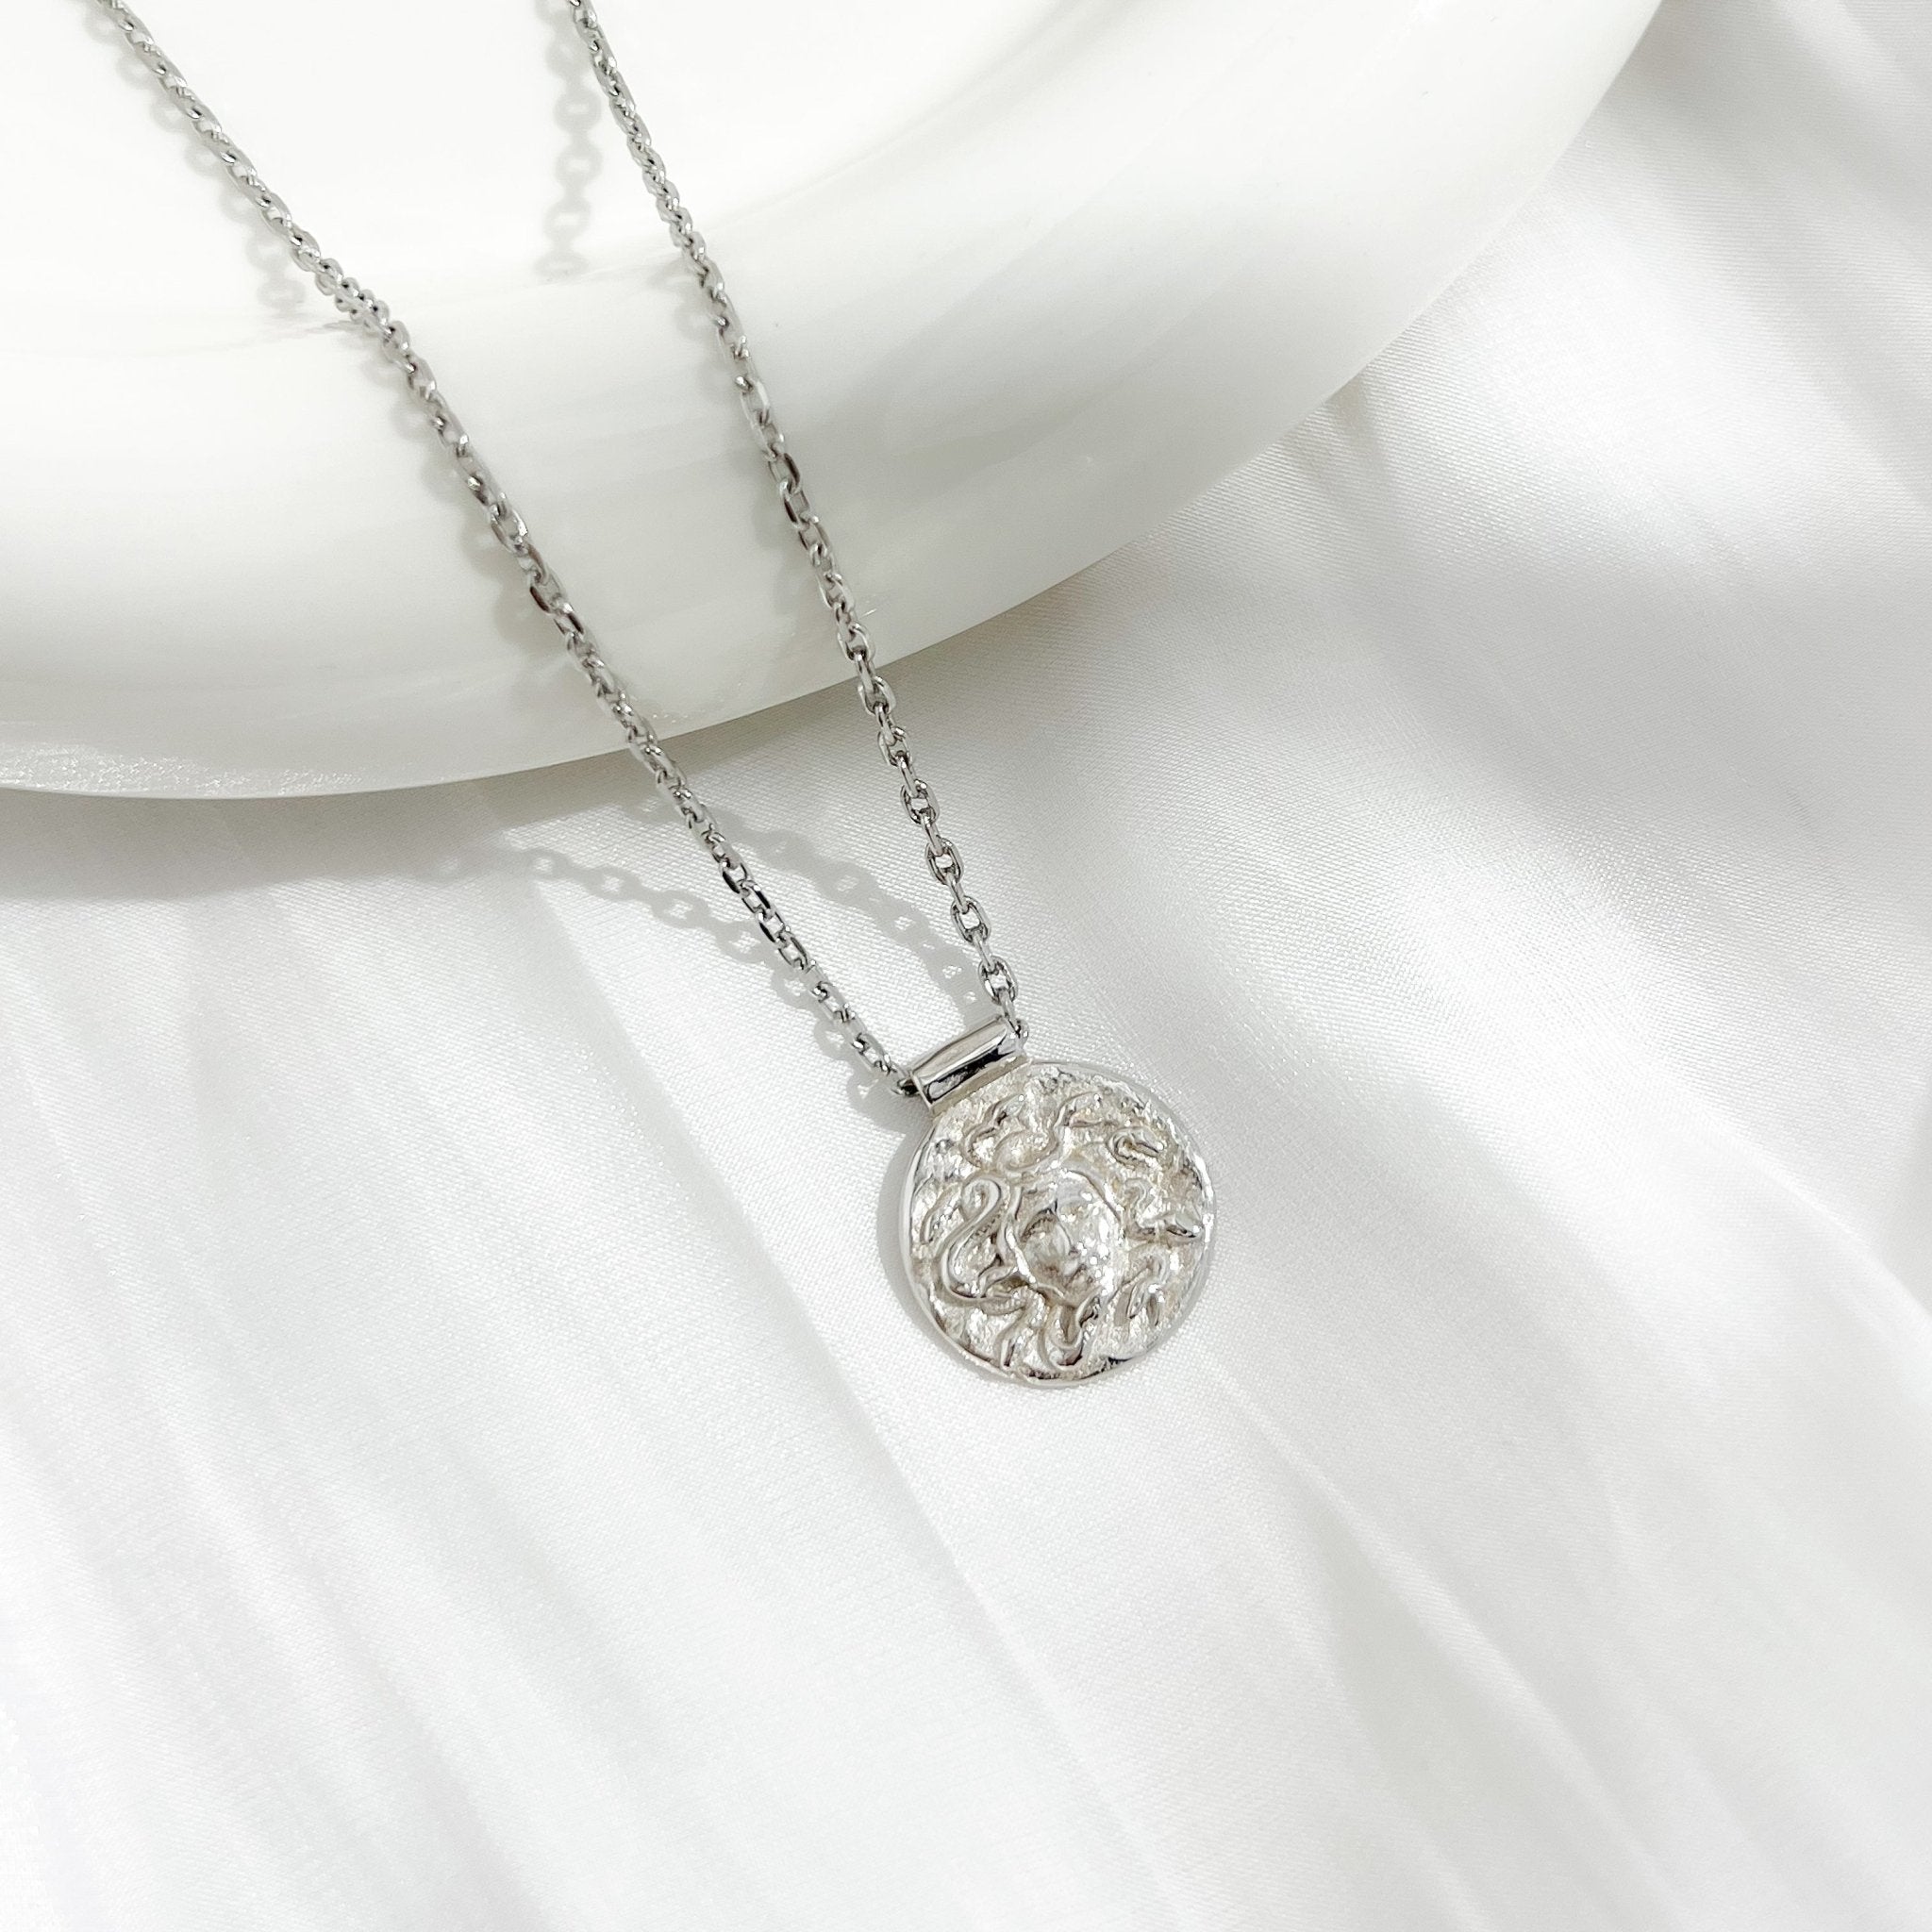 Medusa Necklace in Silver (Unisex) - Flaire & Co.